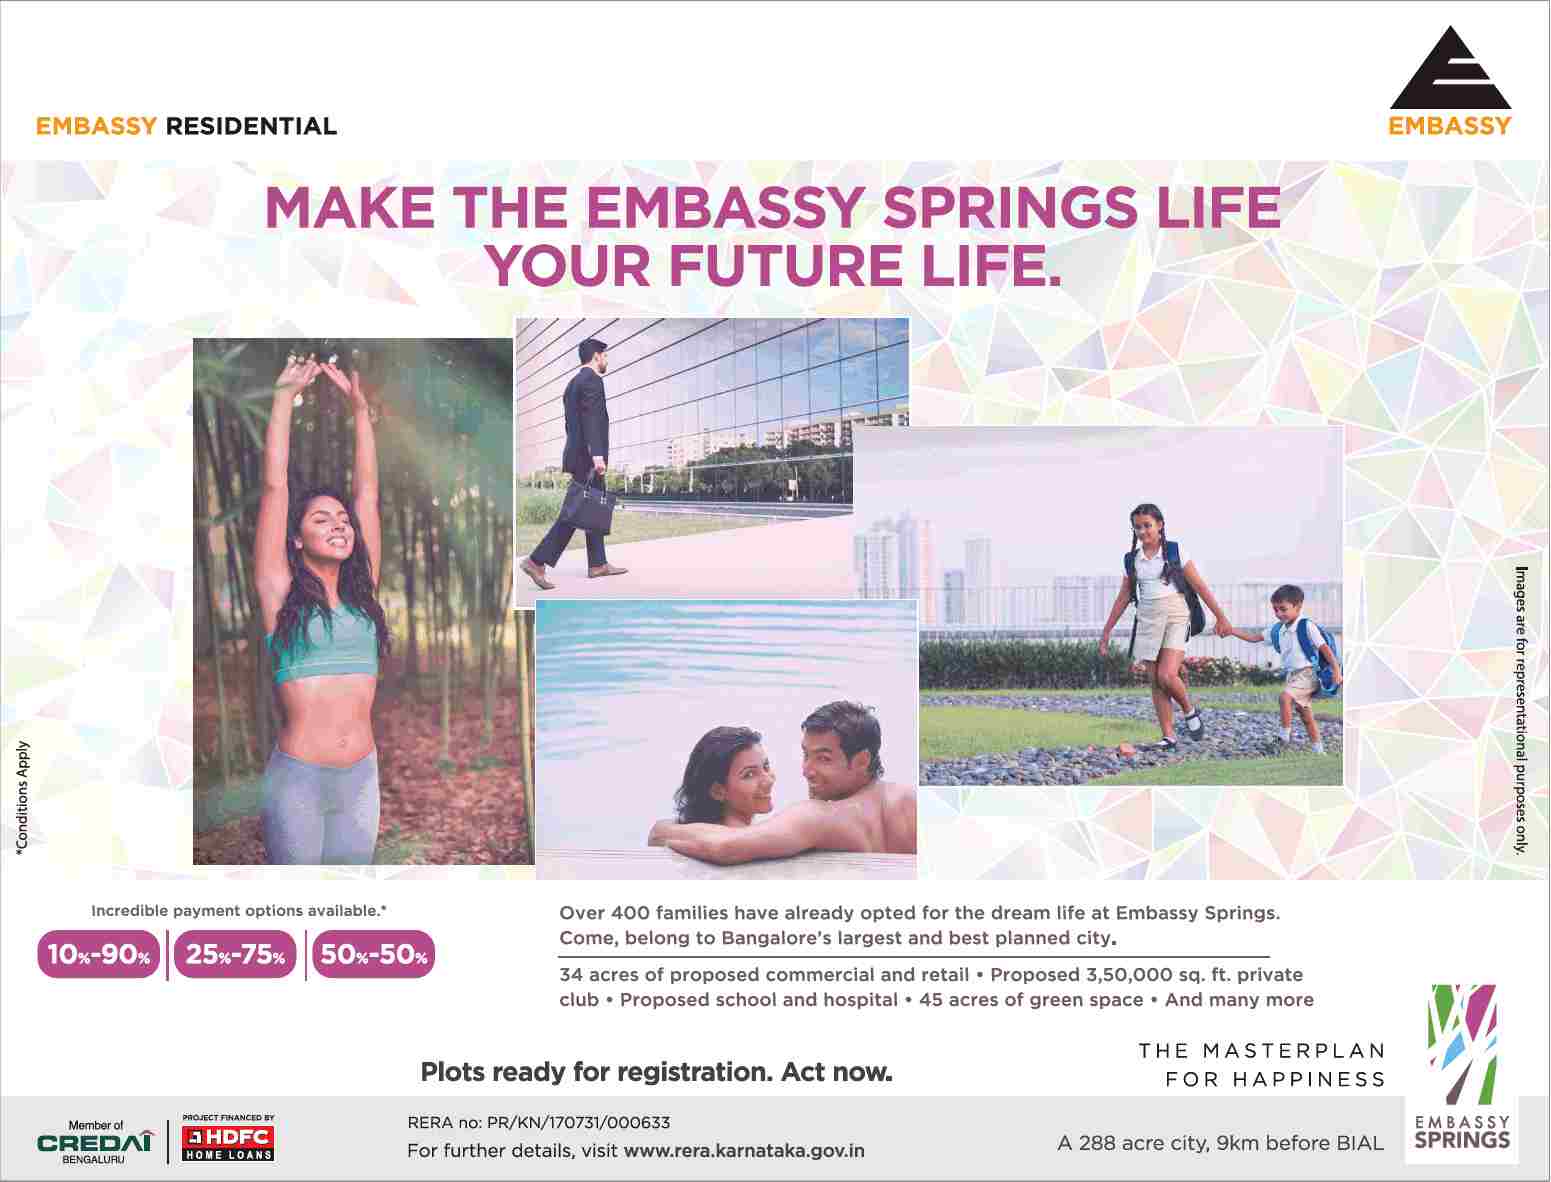 Make the Embassy Springs life your future life in Bangalore